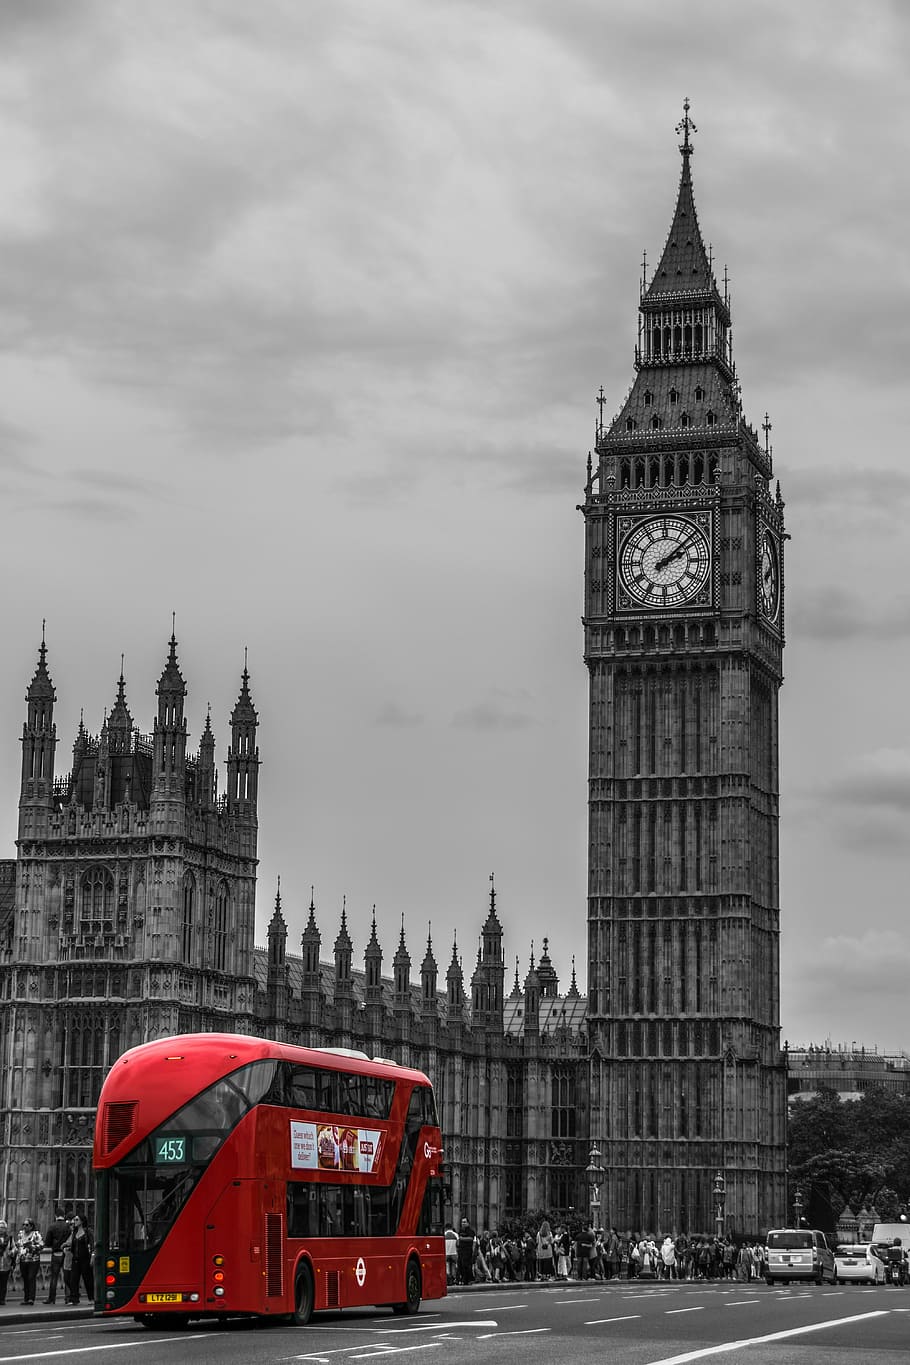 selective color photo of red bus, london, double decker bus, street scene